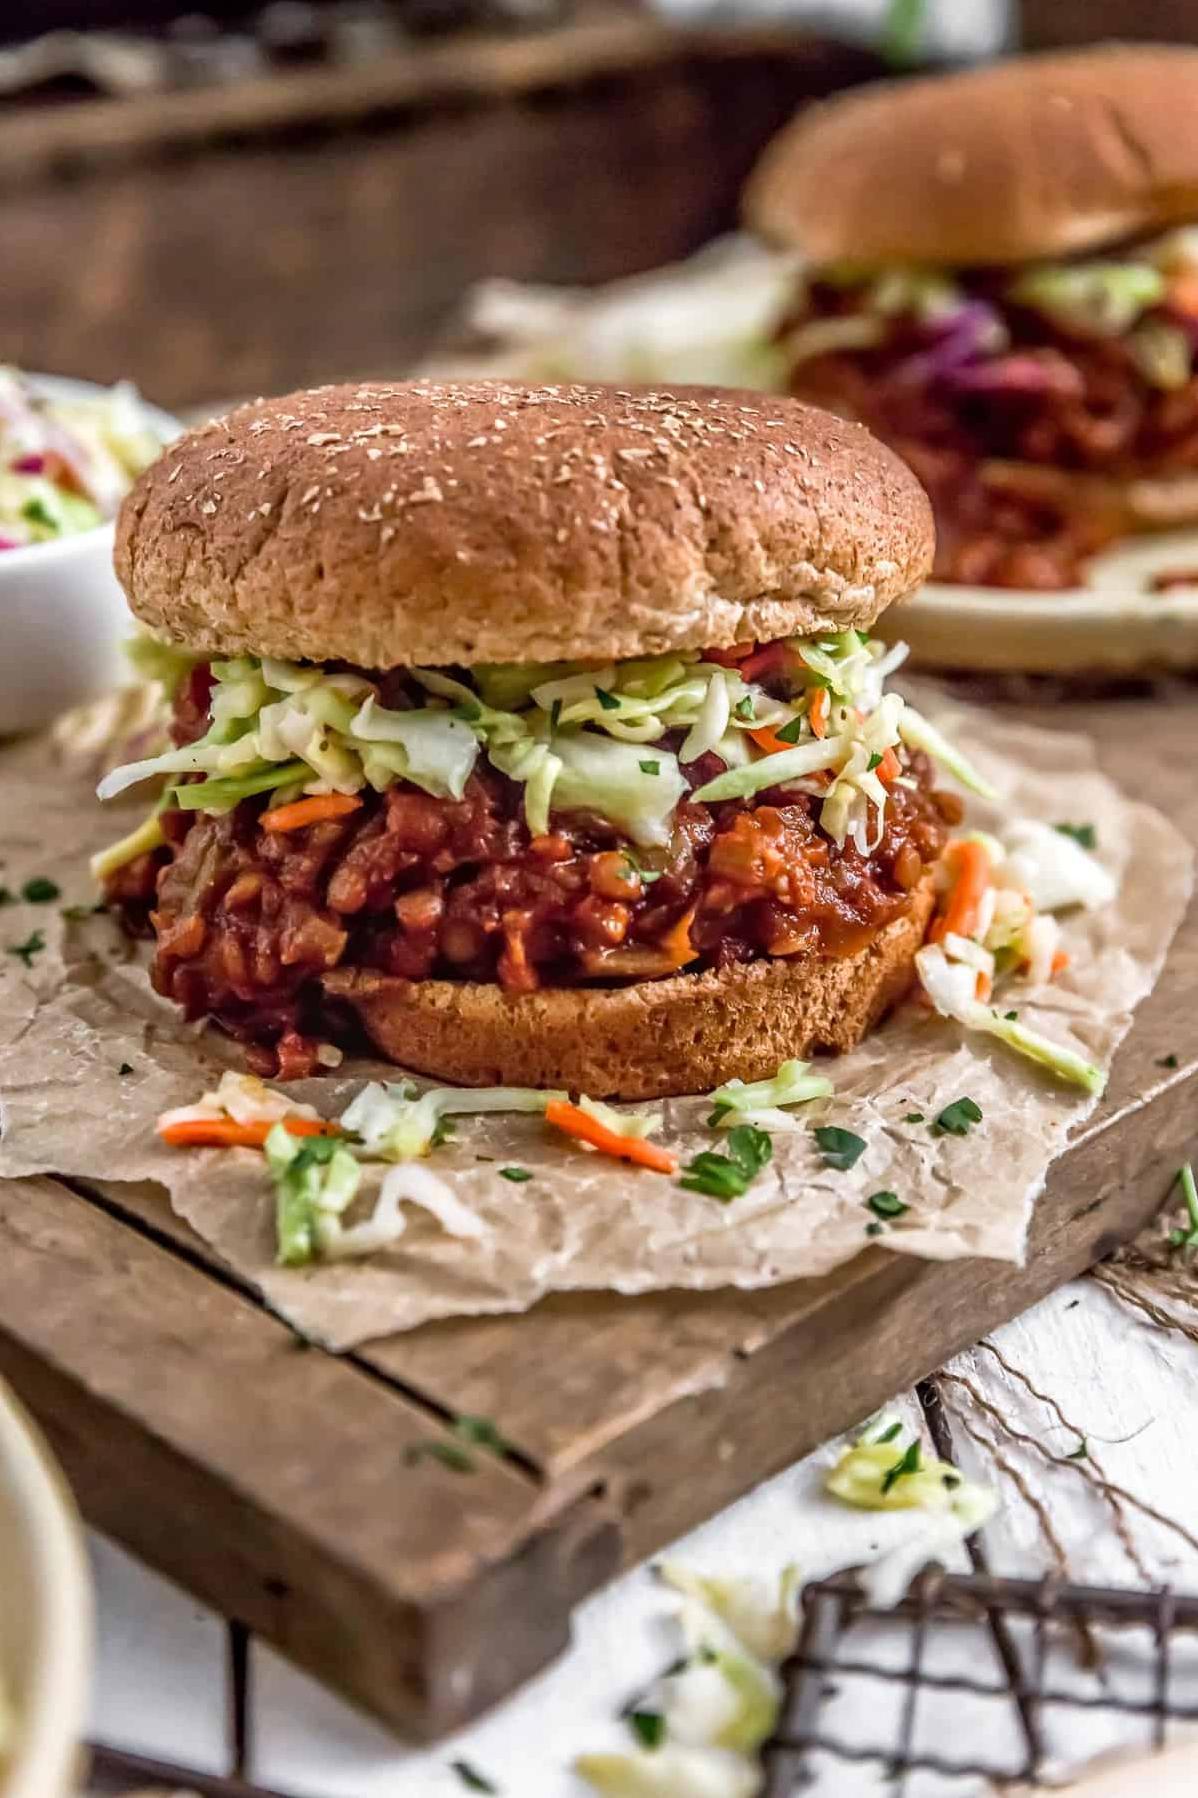  Indulge in the flavors of barbecue sauce, veggies and vegan meat.